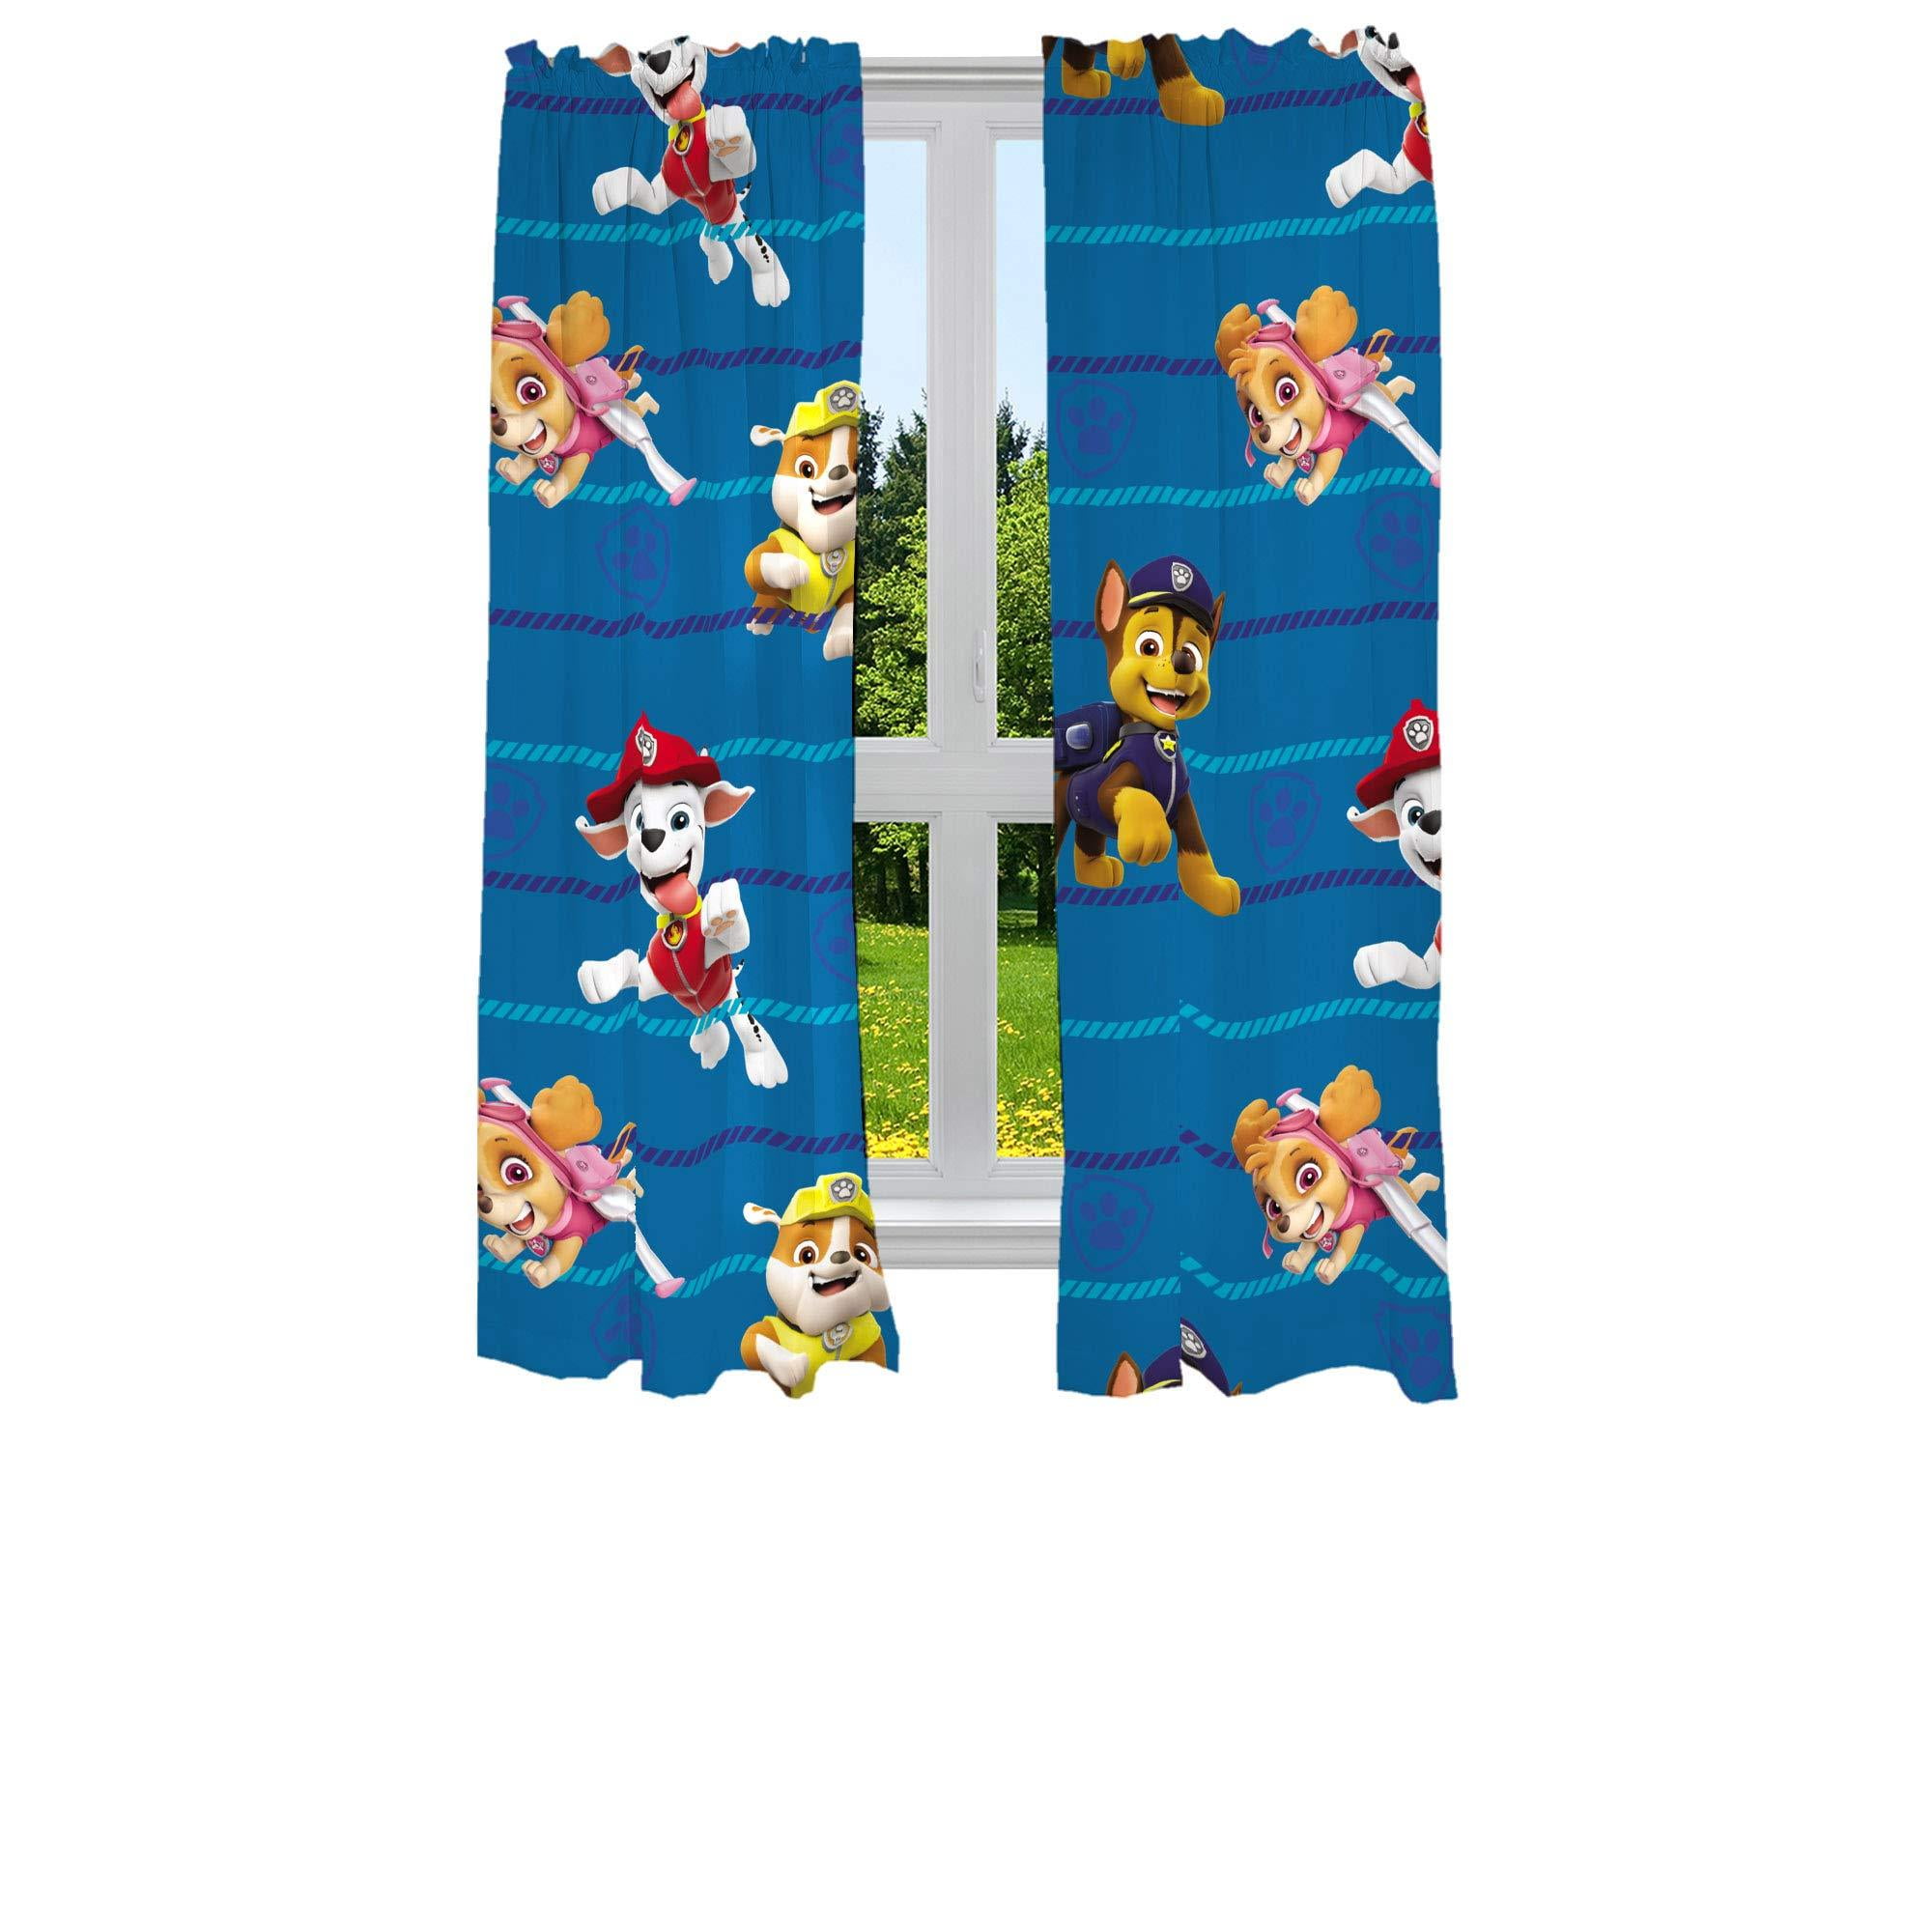 Paw Patrol Nickelodeon Curtains Panels or Valance Nursery Bedroom Blackout or Cotton YOU PICK